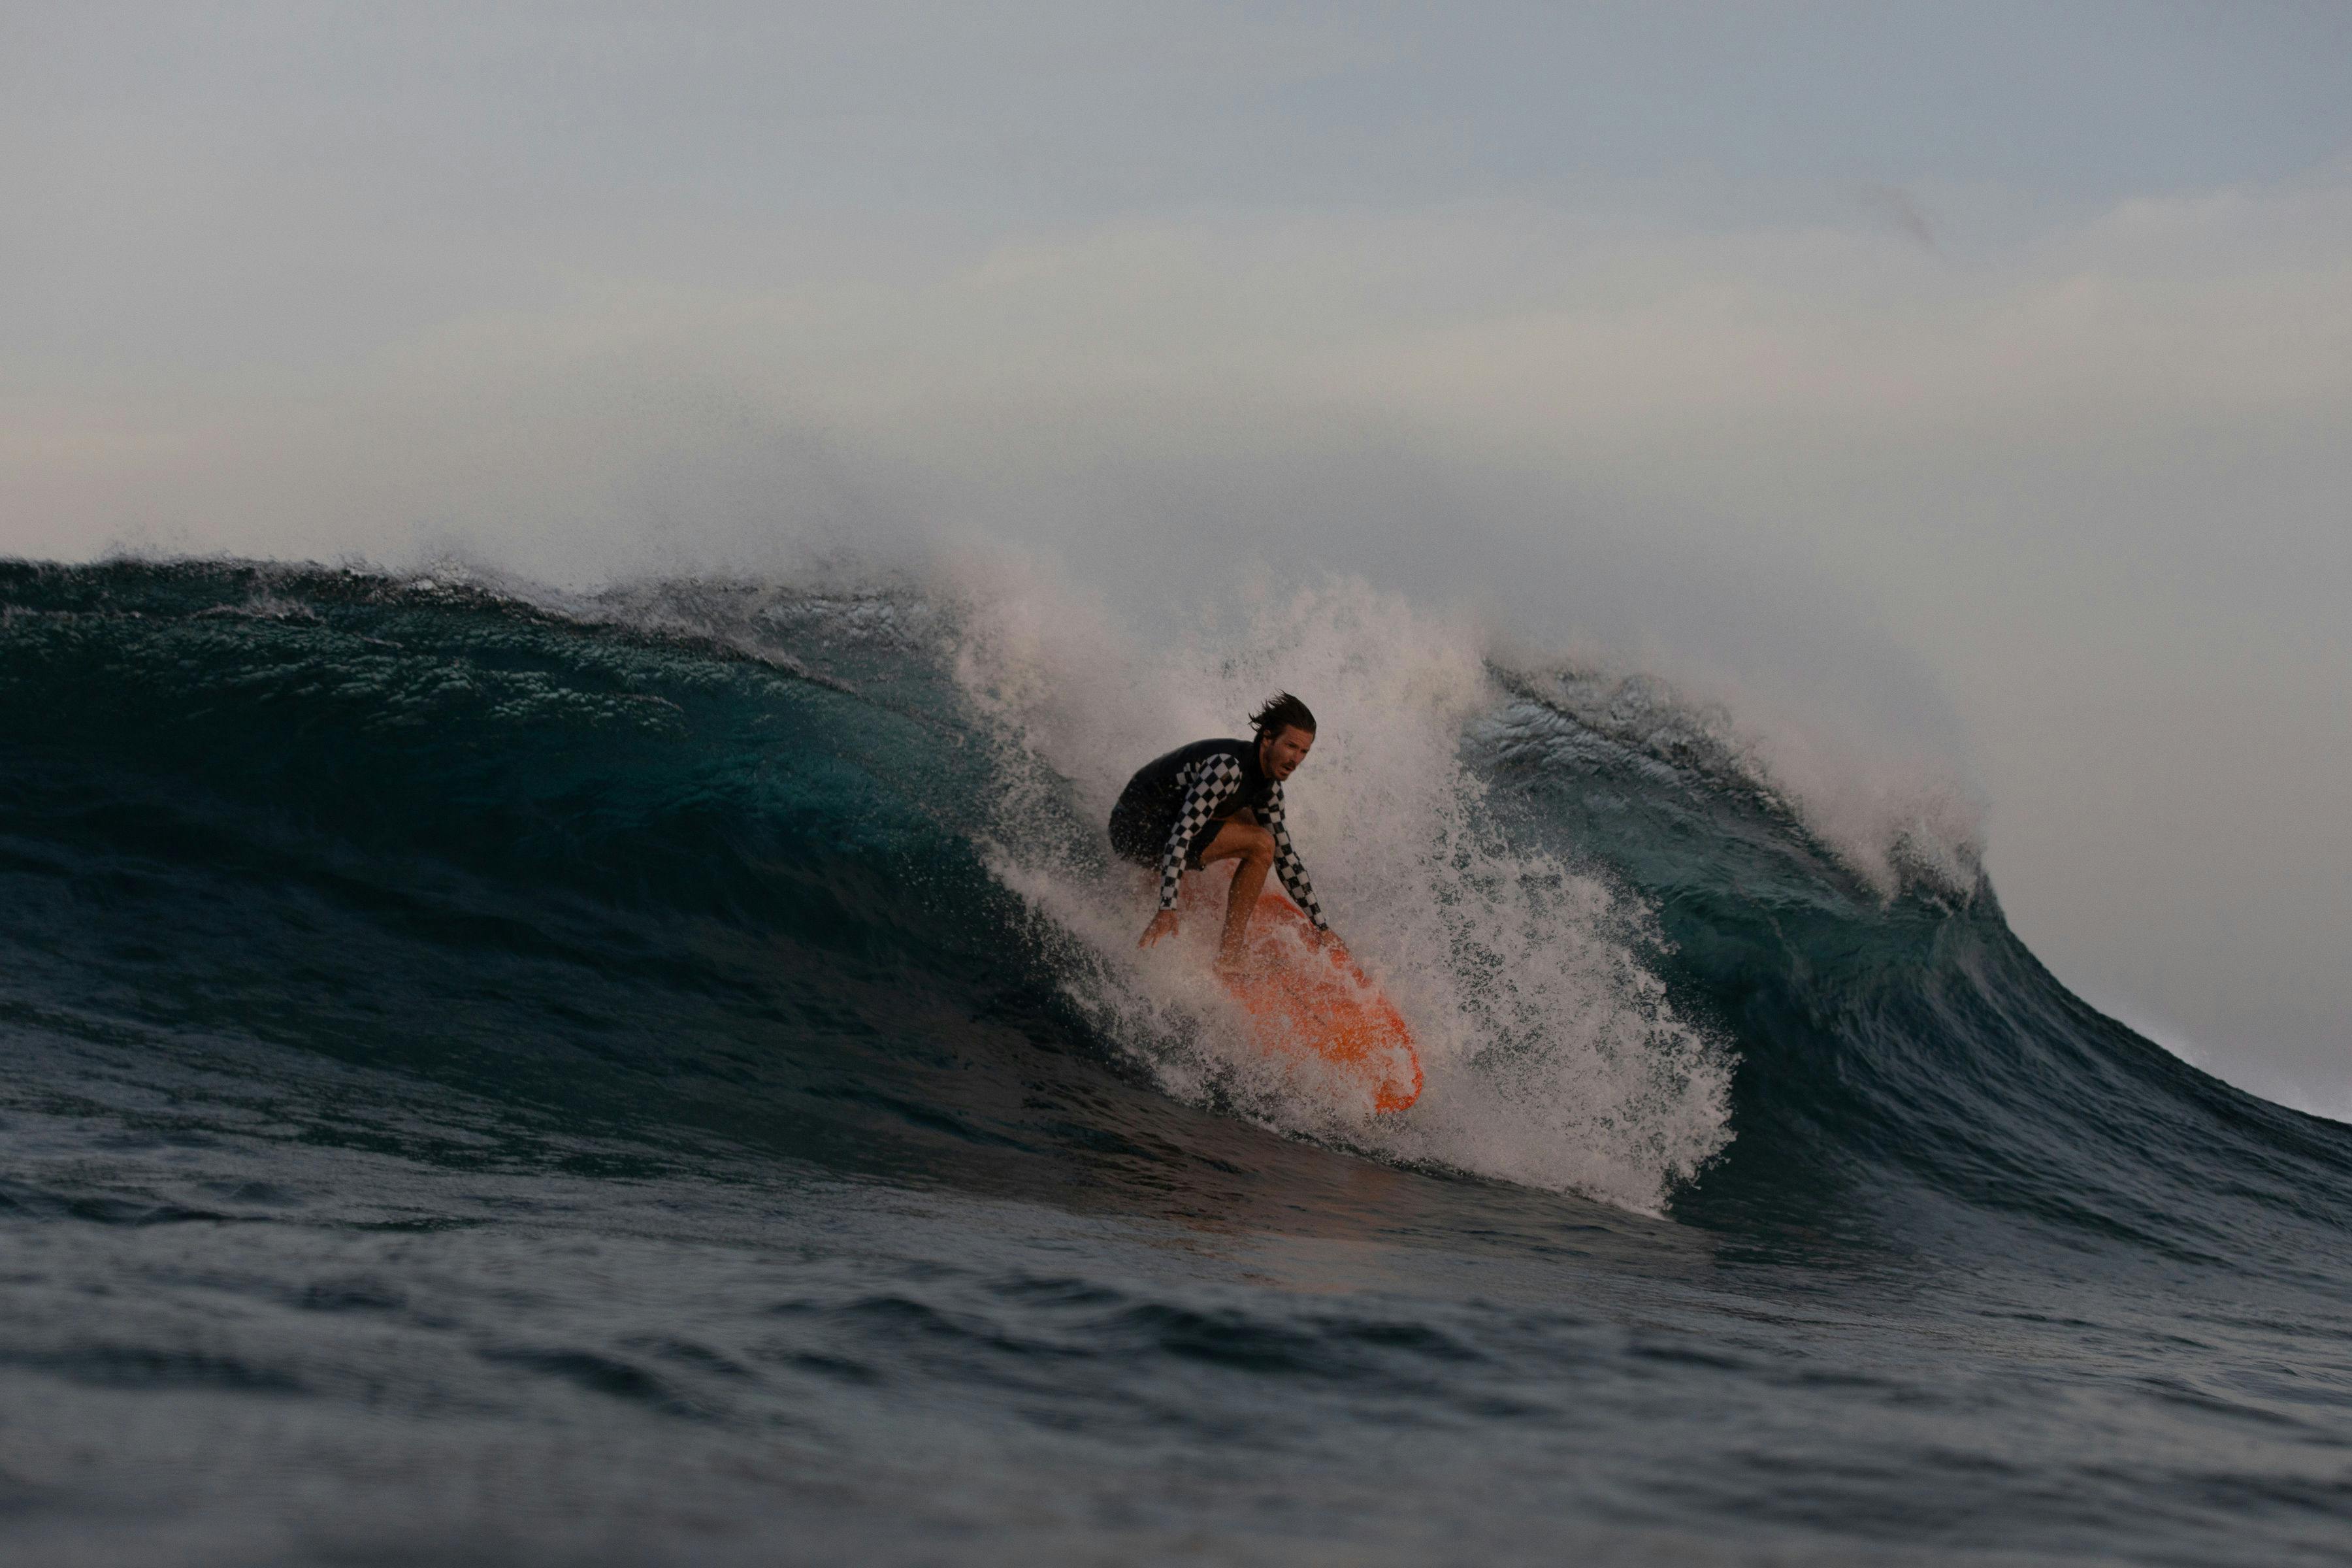 Jorge Abian surfing in the Maldives